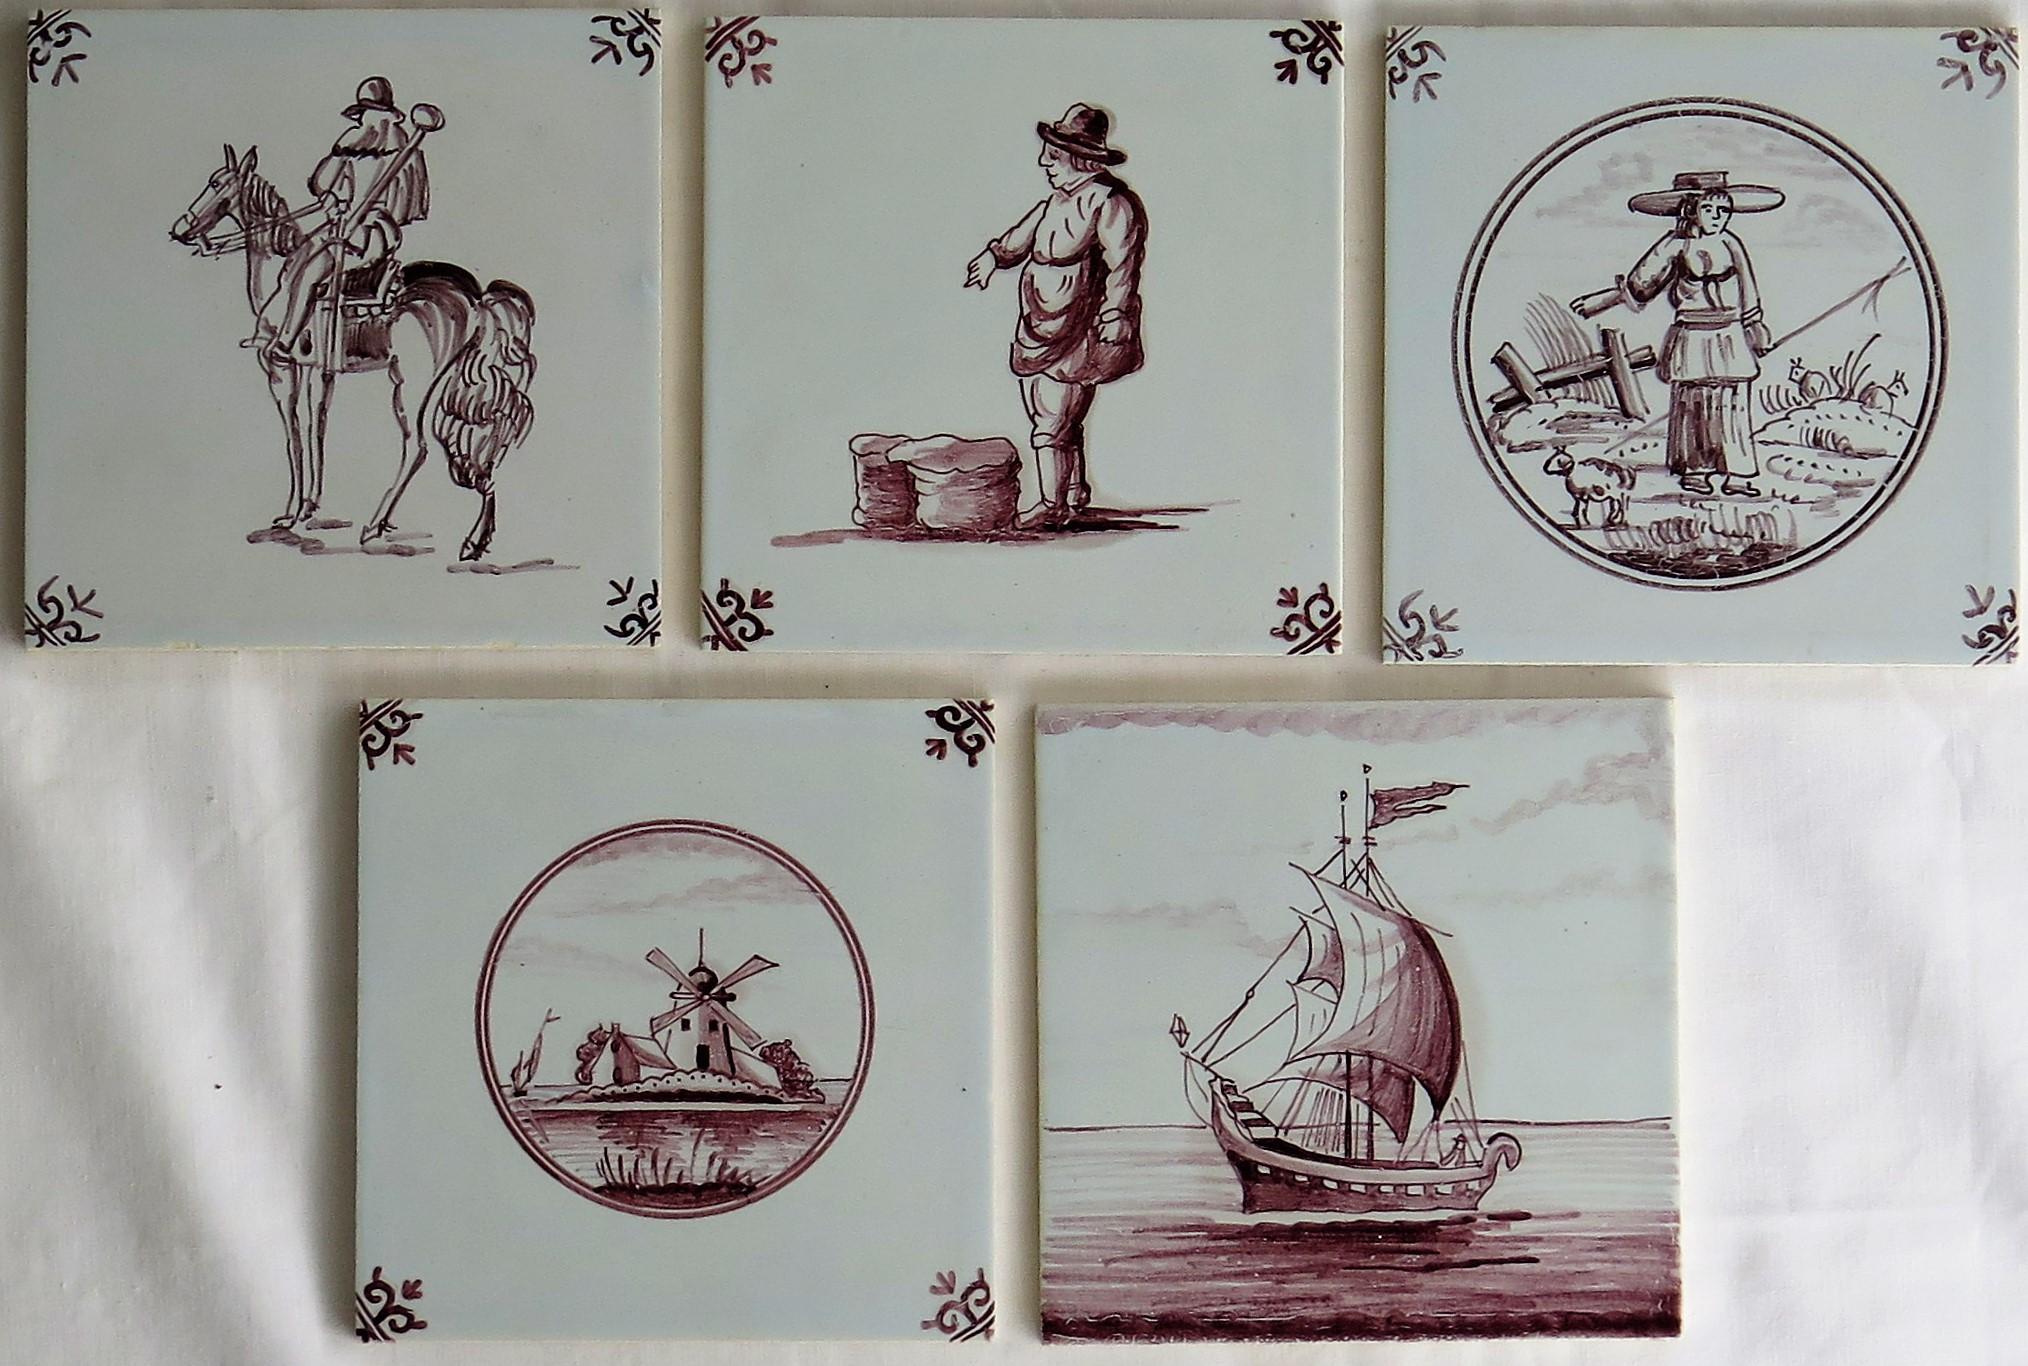 Glazed Set of Five Dutch Delft Manganese Wall Tiles Different Patterns, 20th Century